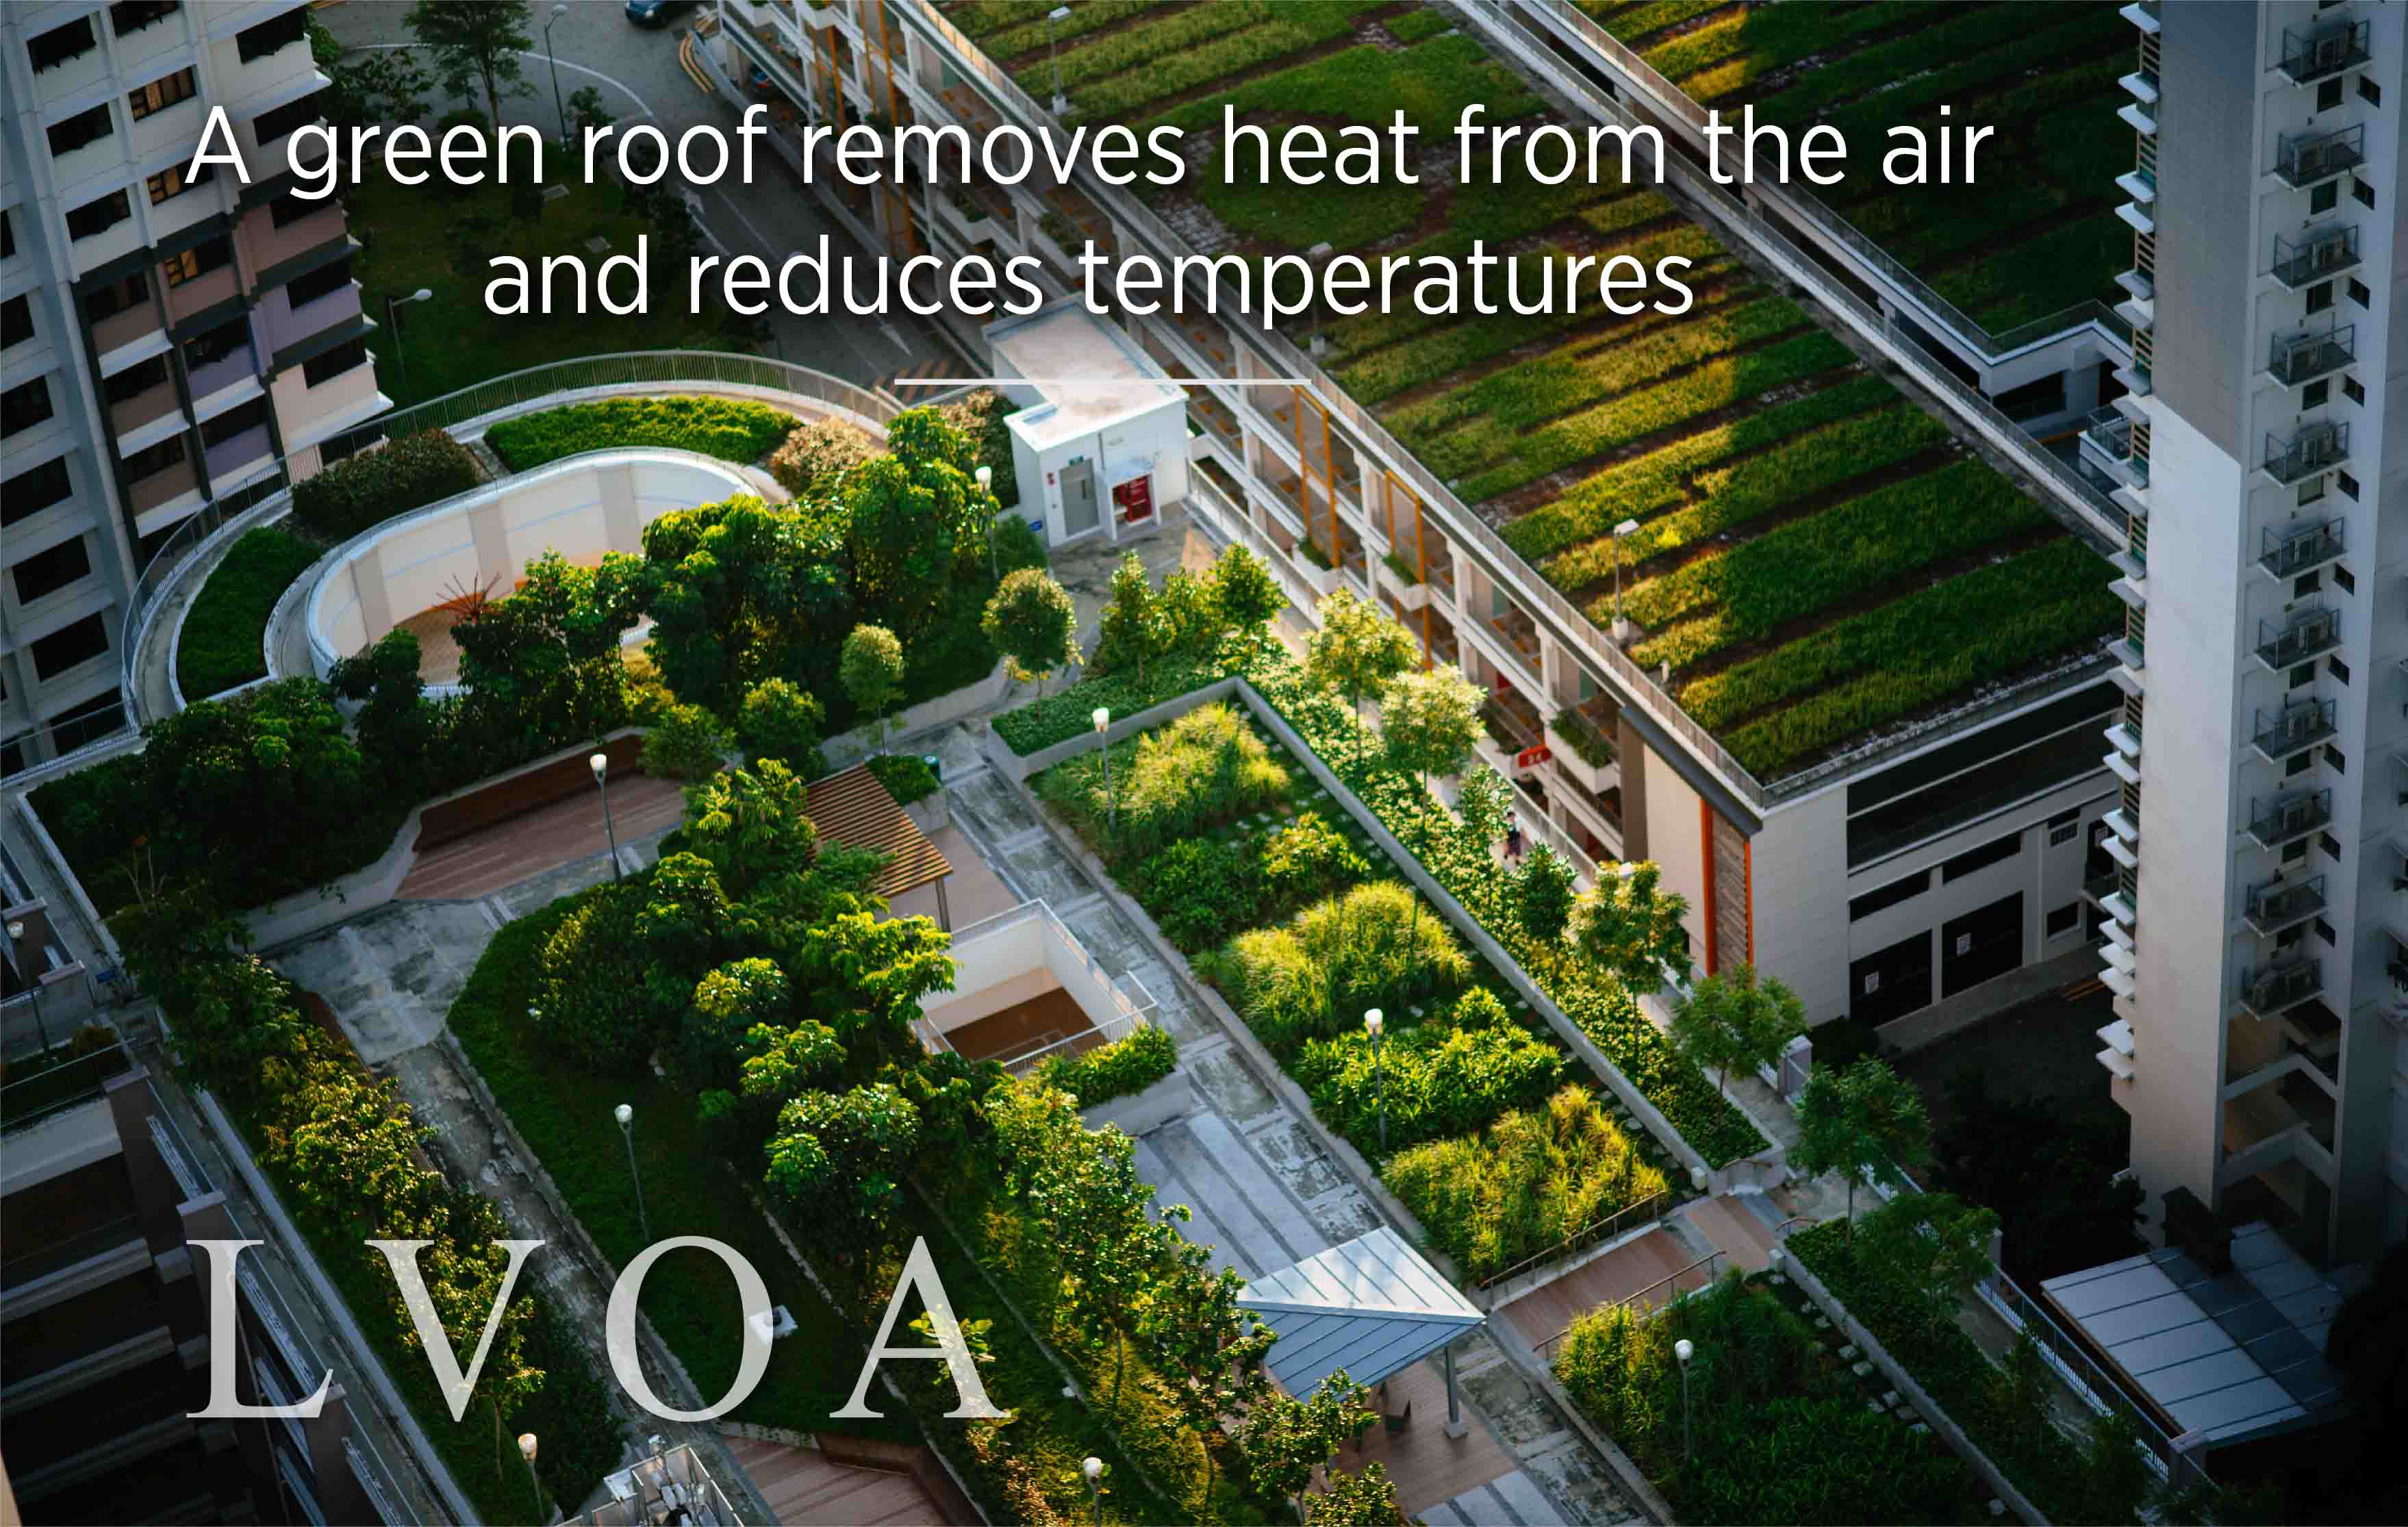  A green roof removes heat from the air and reduces temperatures